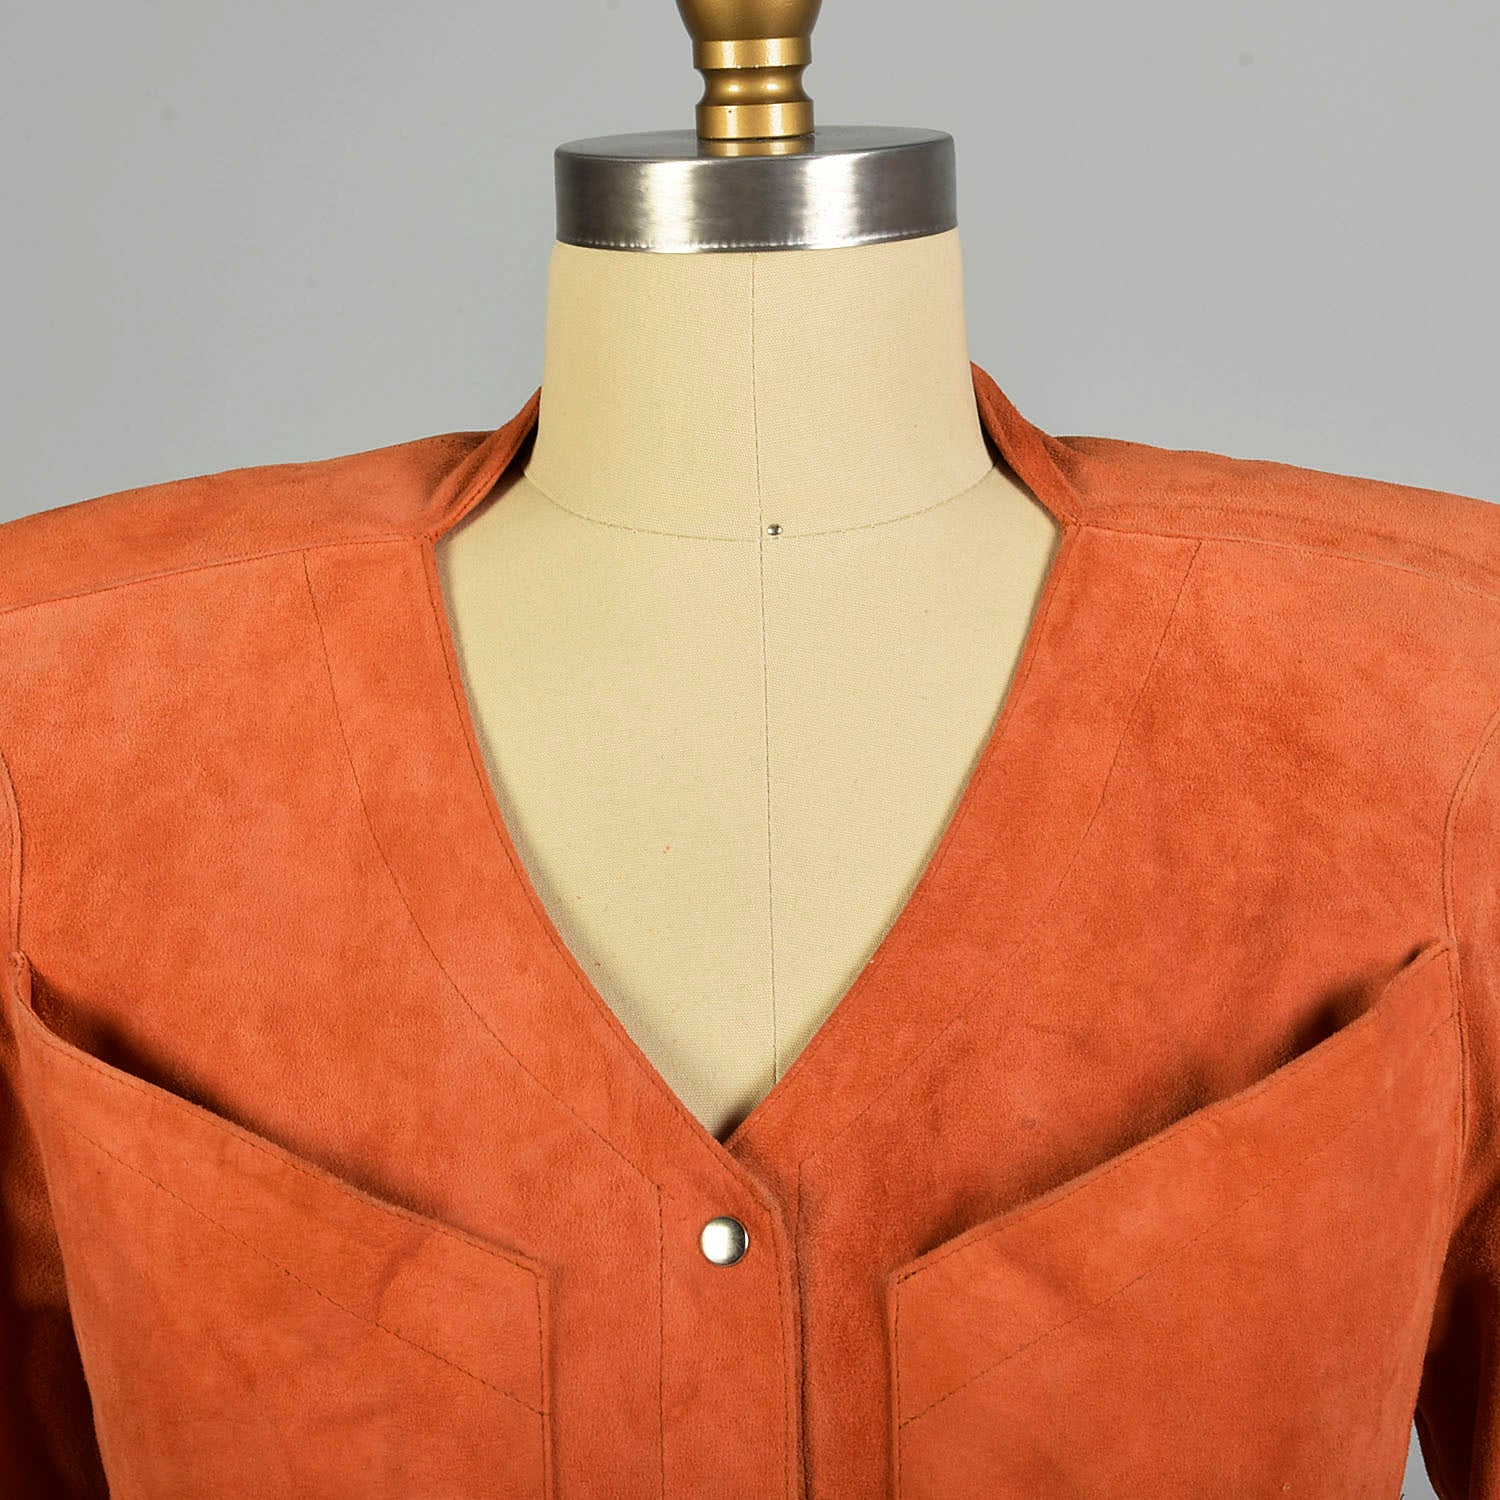 LG 1980s Thierry Mugler Leather Hourglass Suede Dress Orange Snap Front Knee Length Sexy Fitted Dress